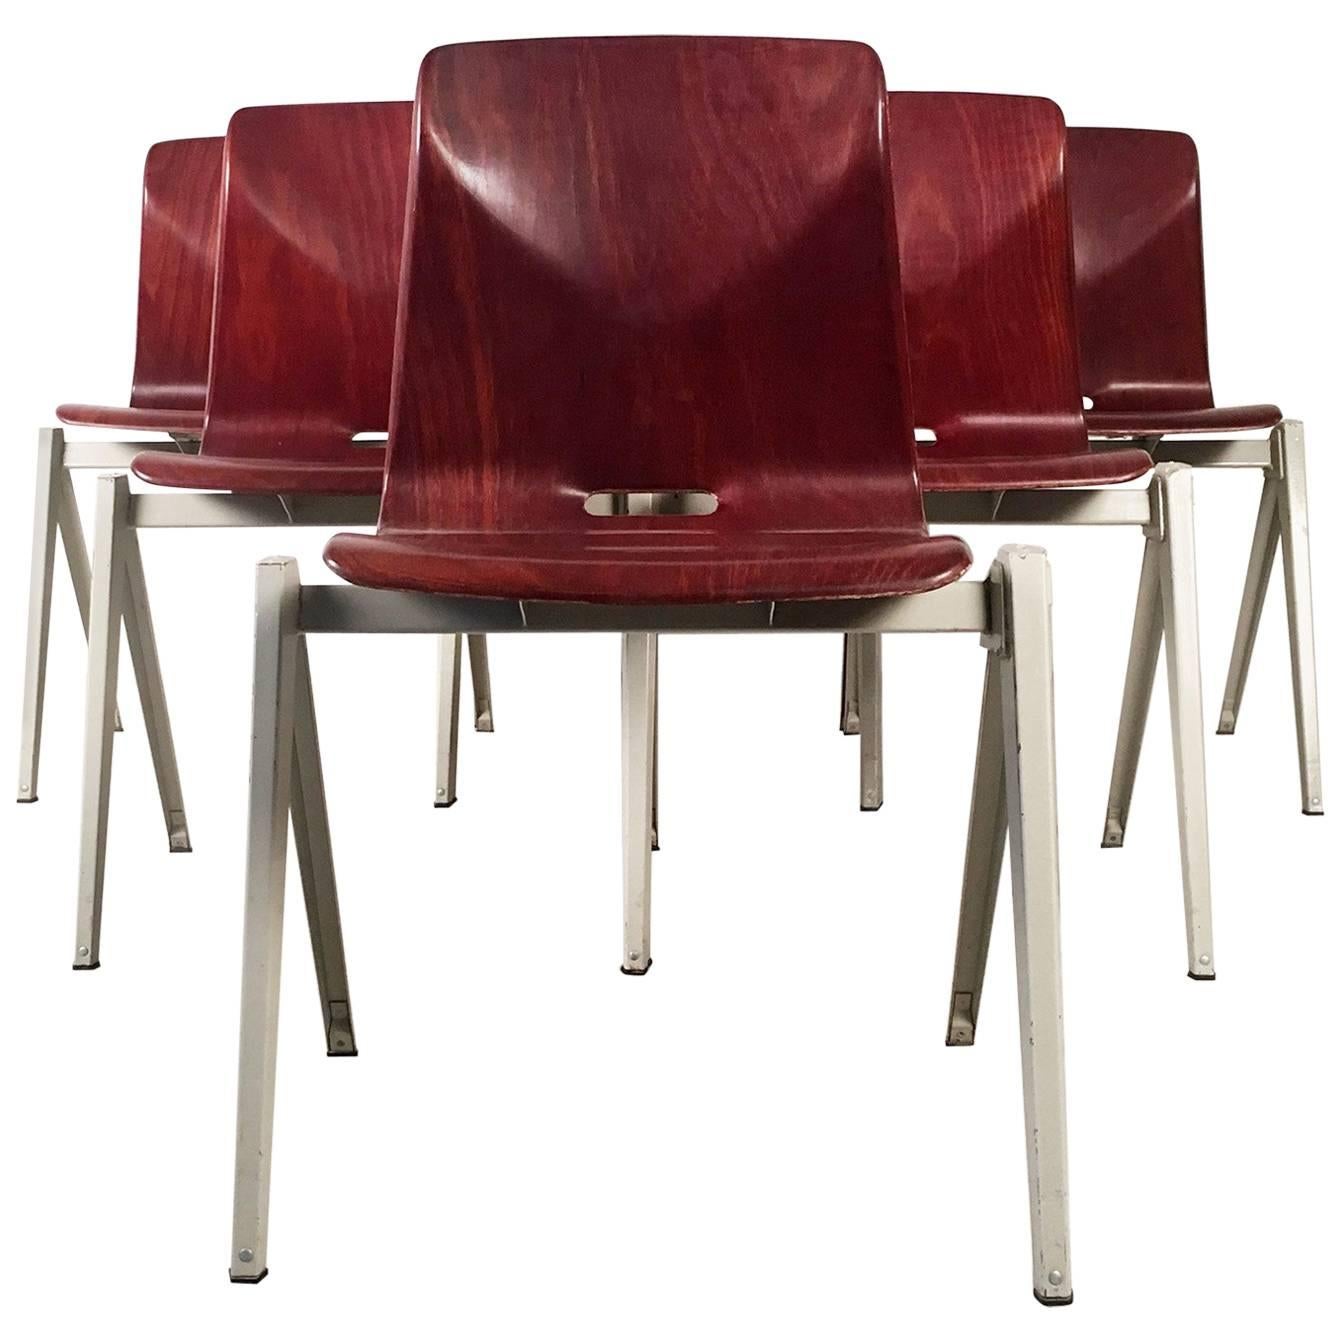 Six Dutch Industrial Design Stacking Chairs from the 1960s For Sale